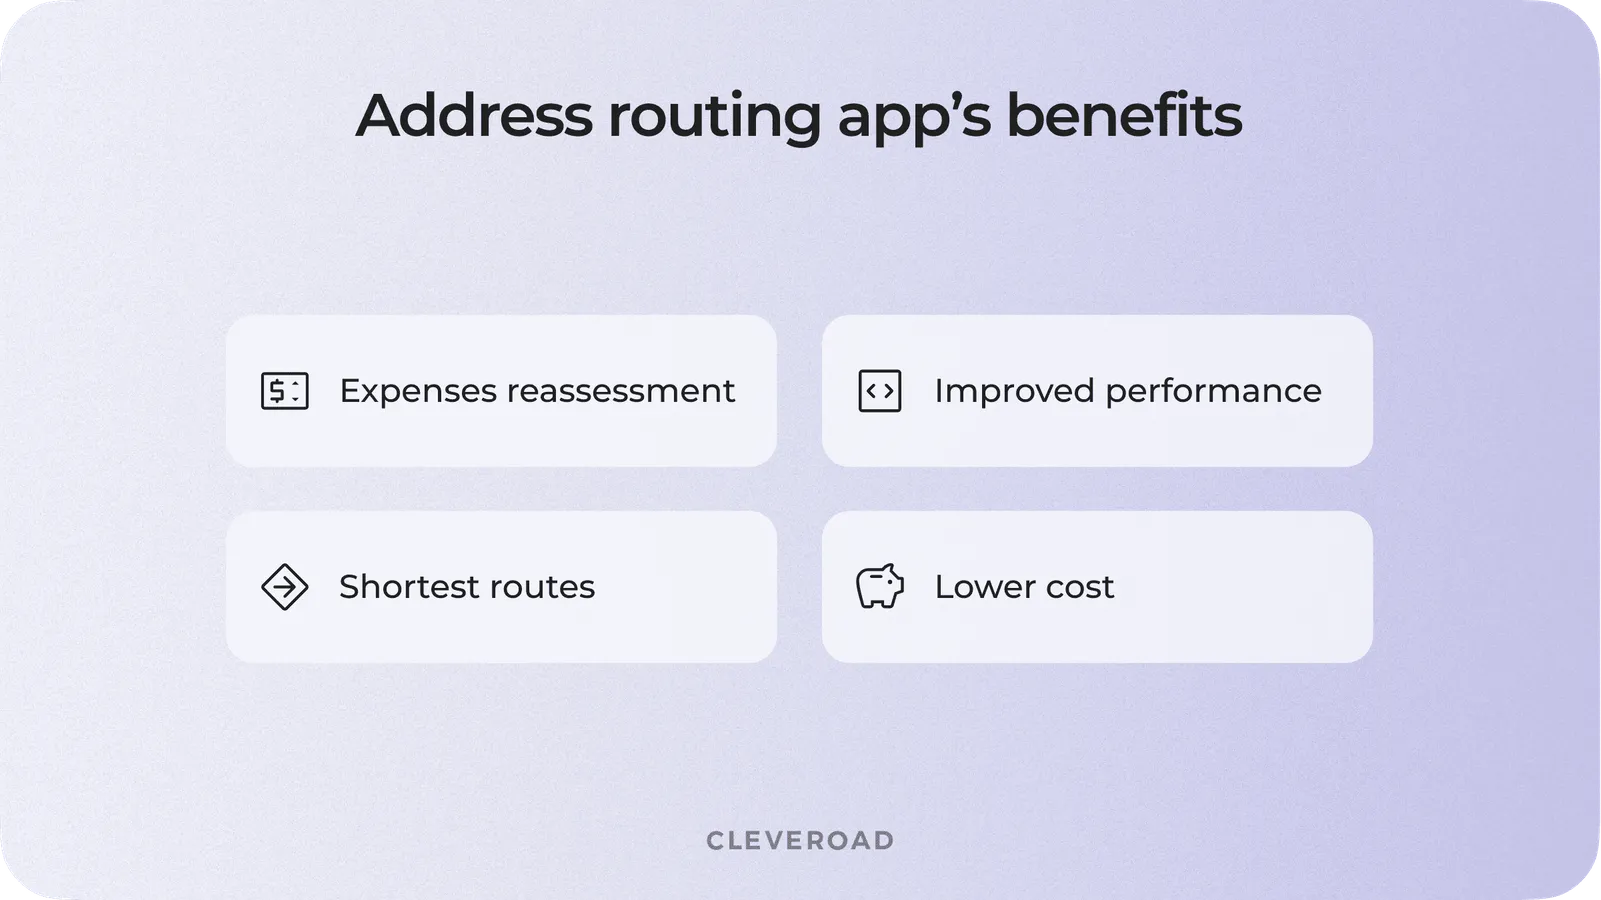 How can you benefit from route optimizer app?